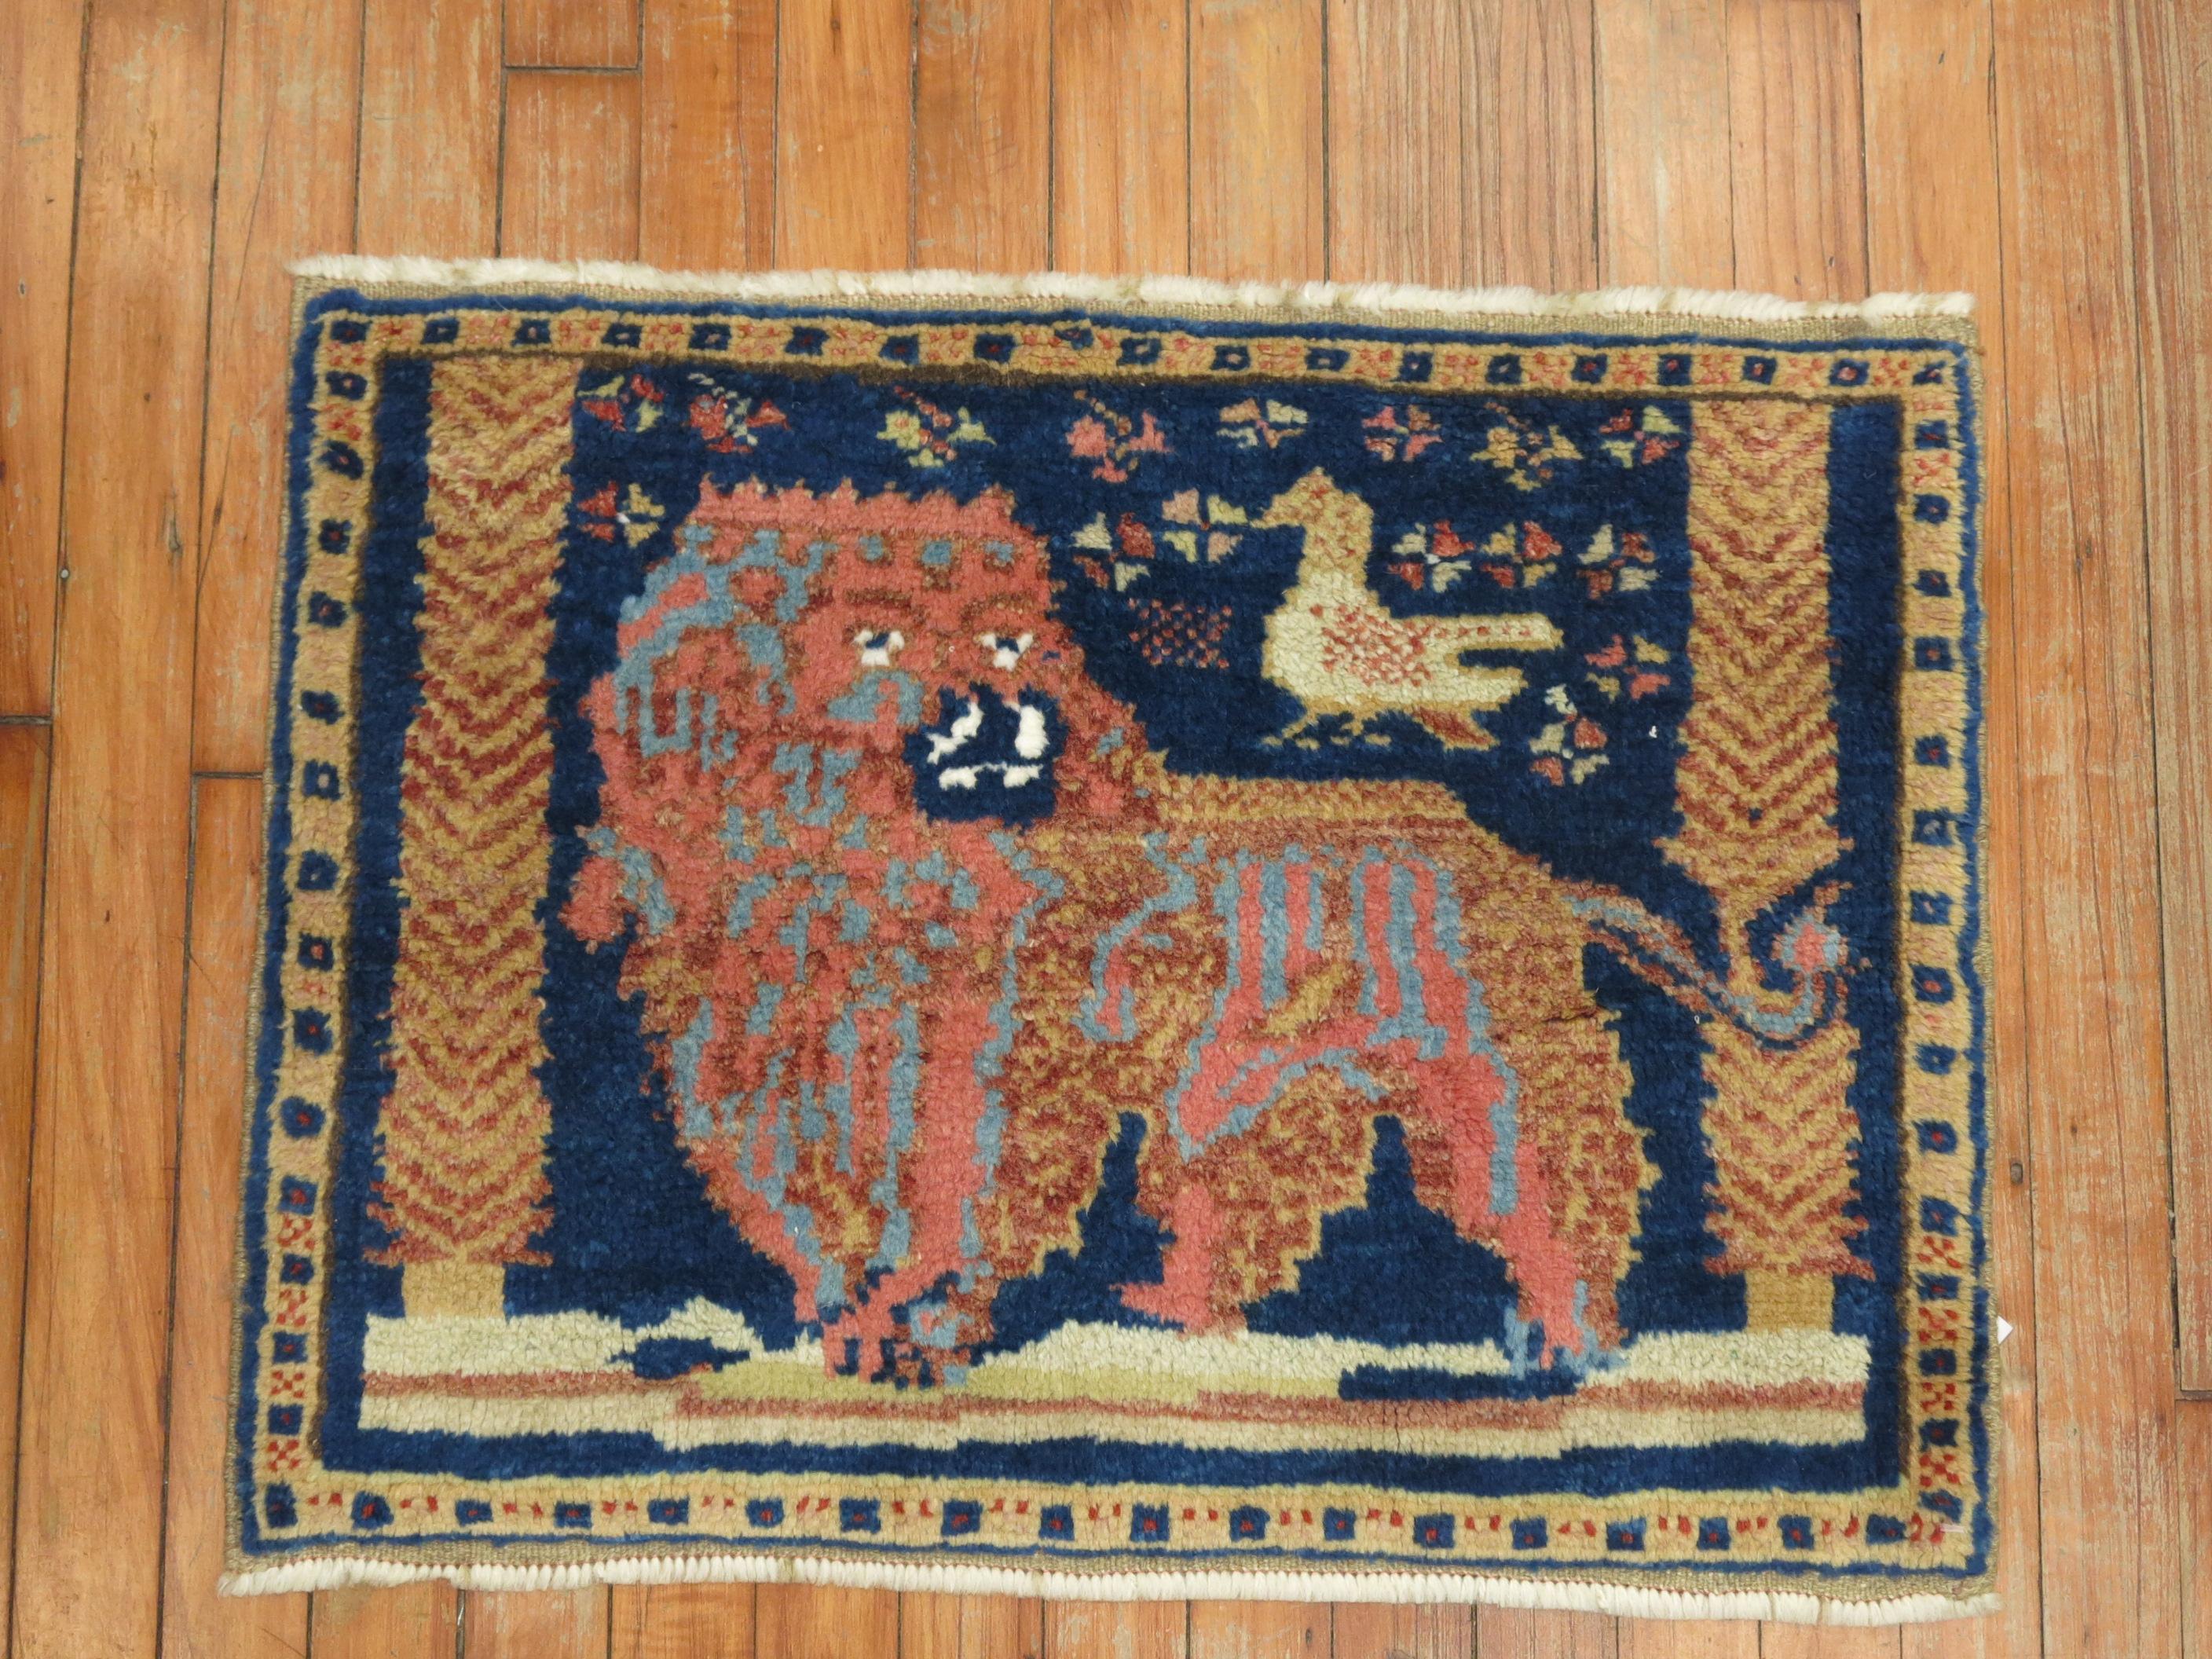 A mid-20th century Turkish rug depicting a stand alone lion with a small pigeon hovering over on a deep blue colored field.